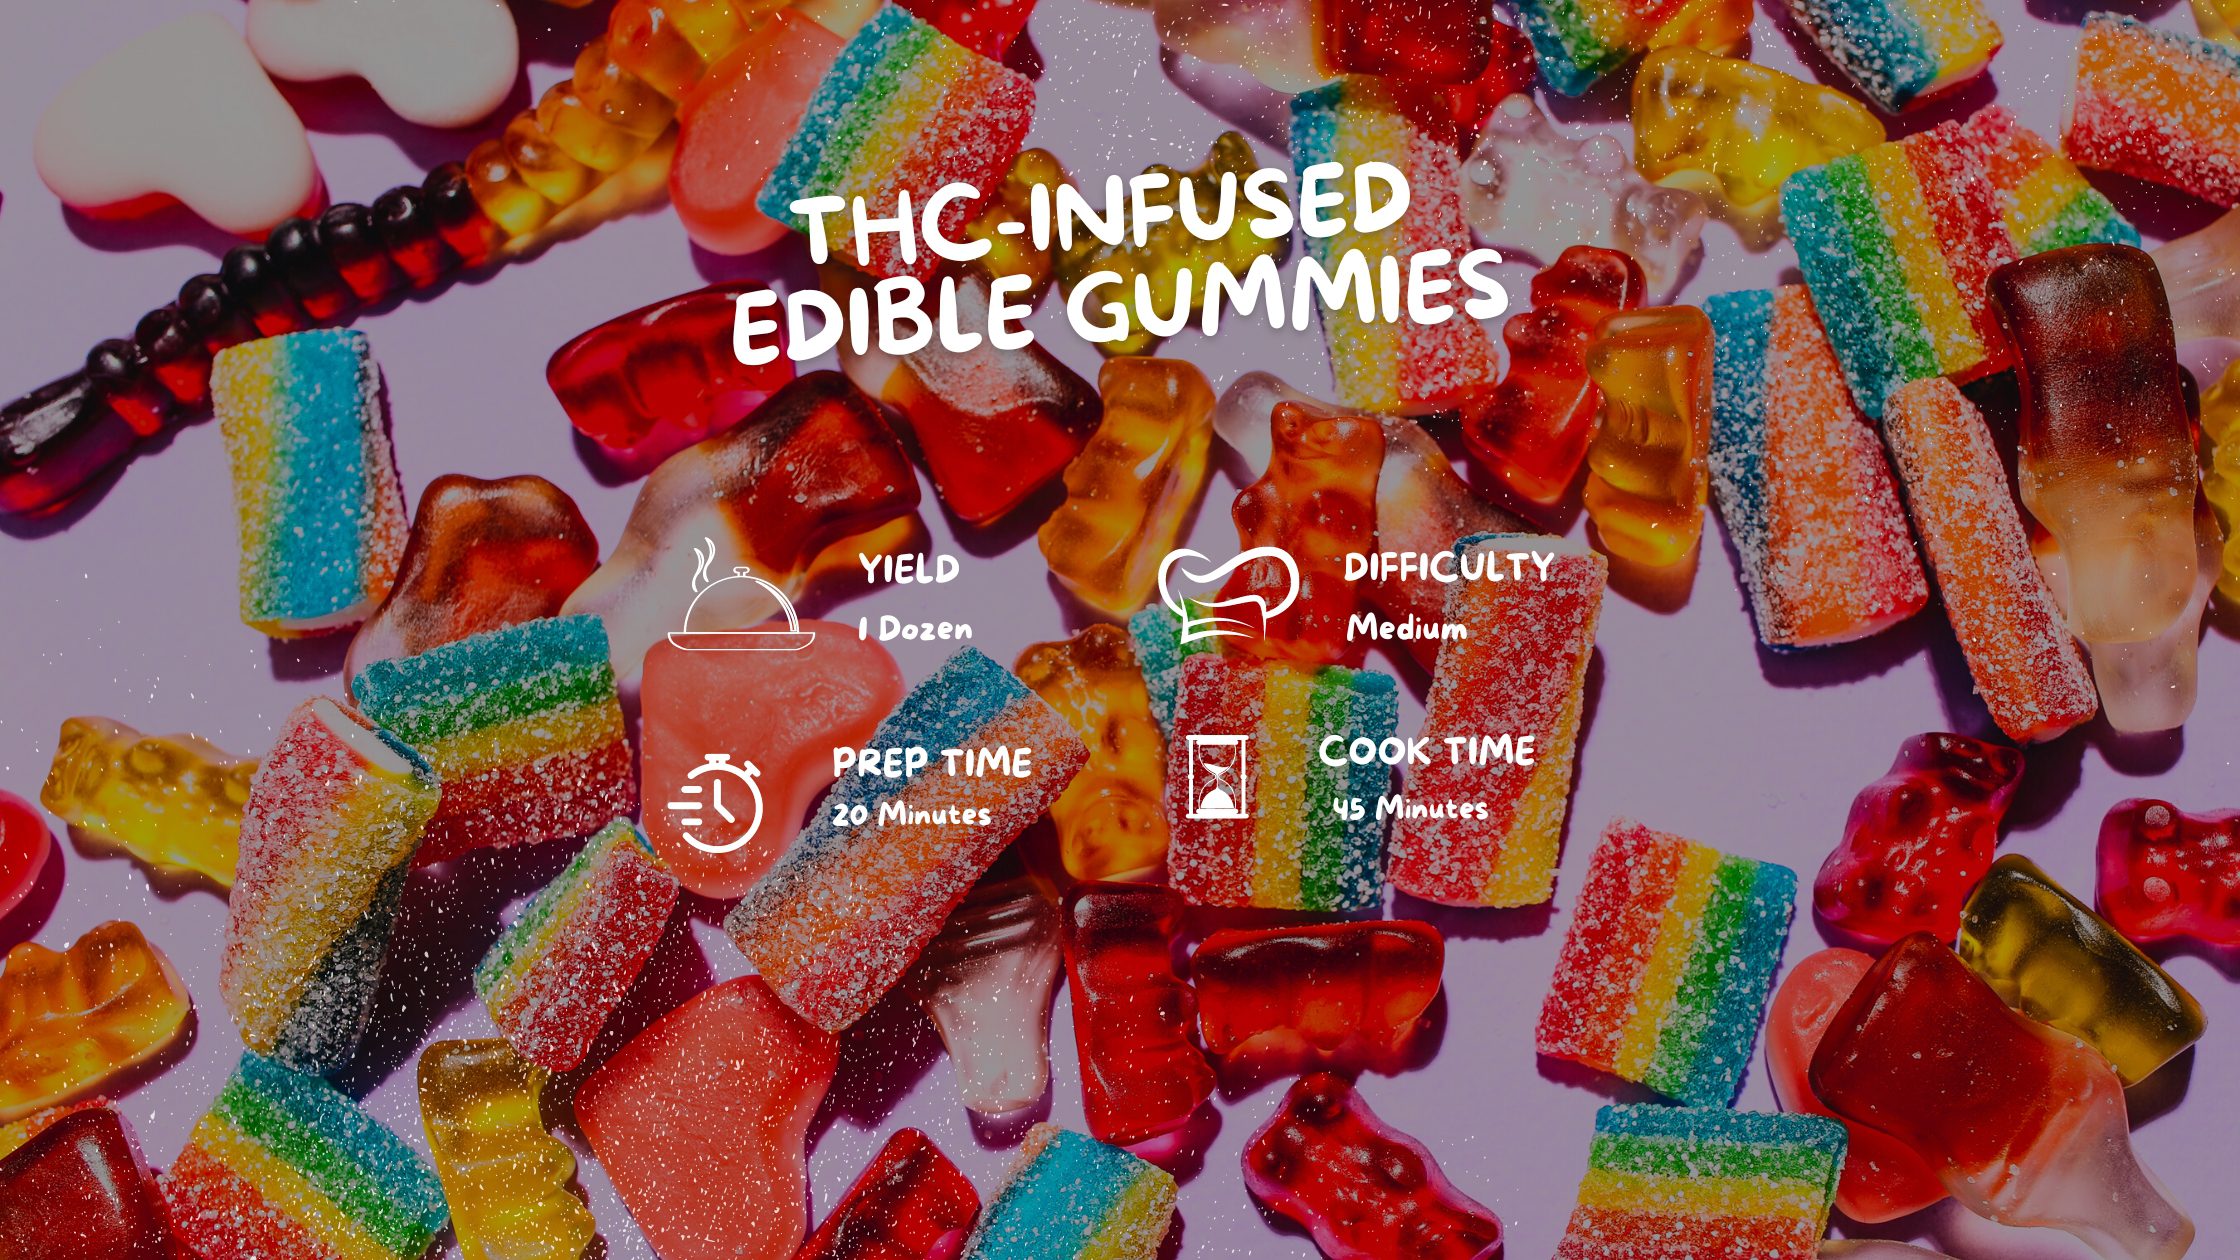 https://oldroute66wellness.com/wp-content/uploads/2022/06/Infused-Edible-Gummies-2240-%C3%97-1260-px.jpg